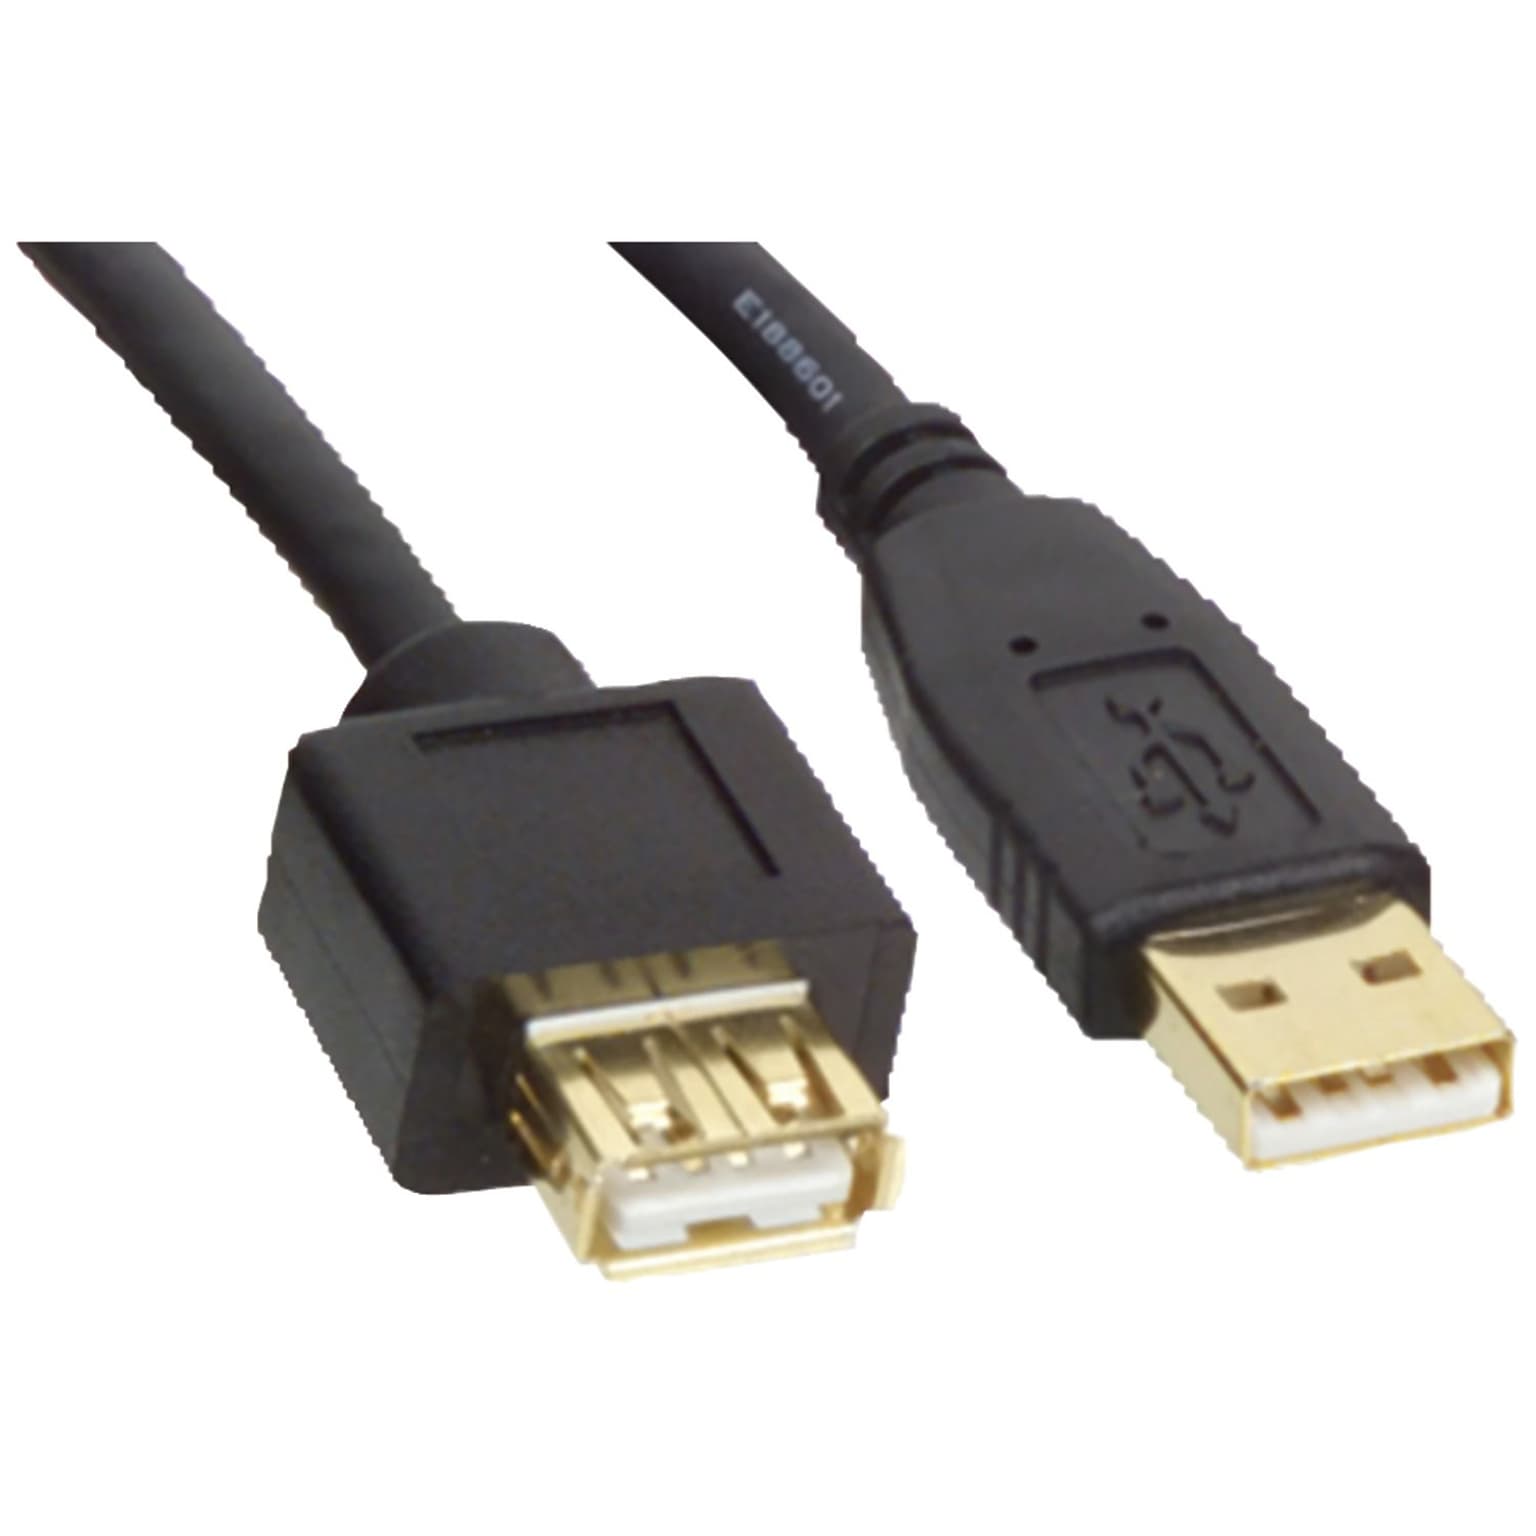 Tripp Lite 6 USB 2.0 Type A Male to Type A Female Extension Cable, Black